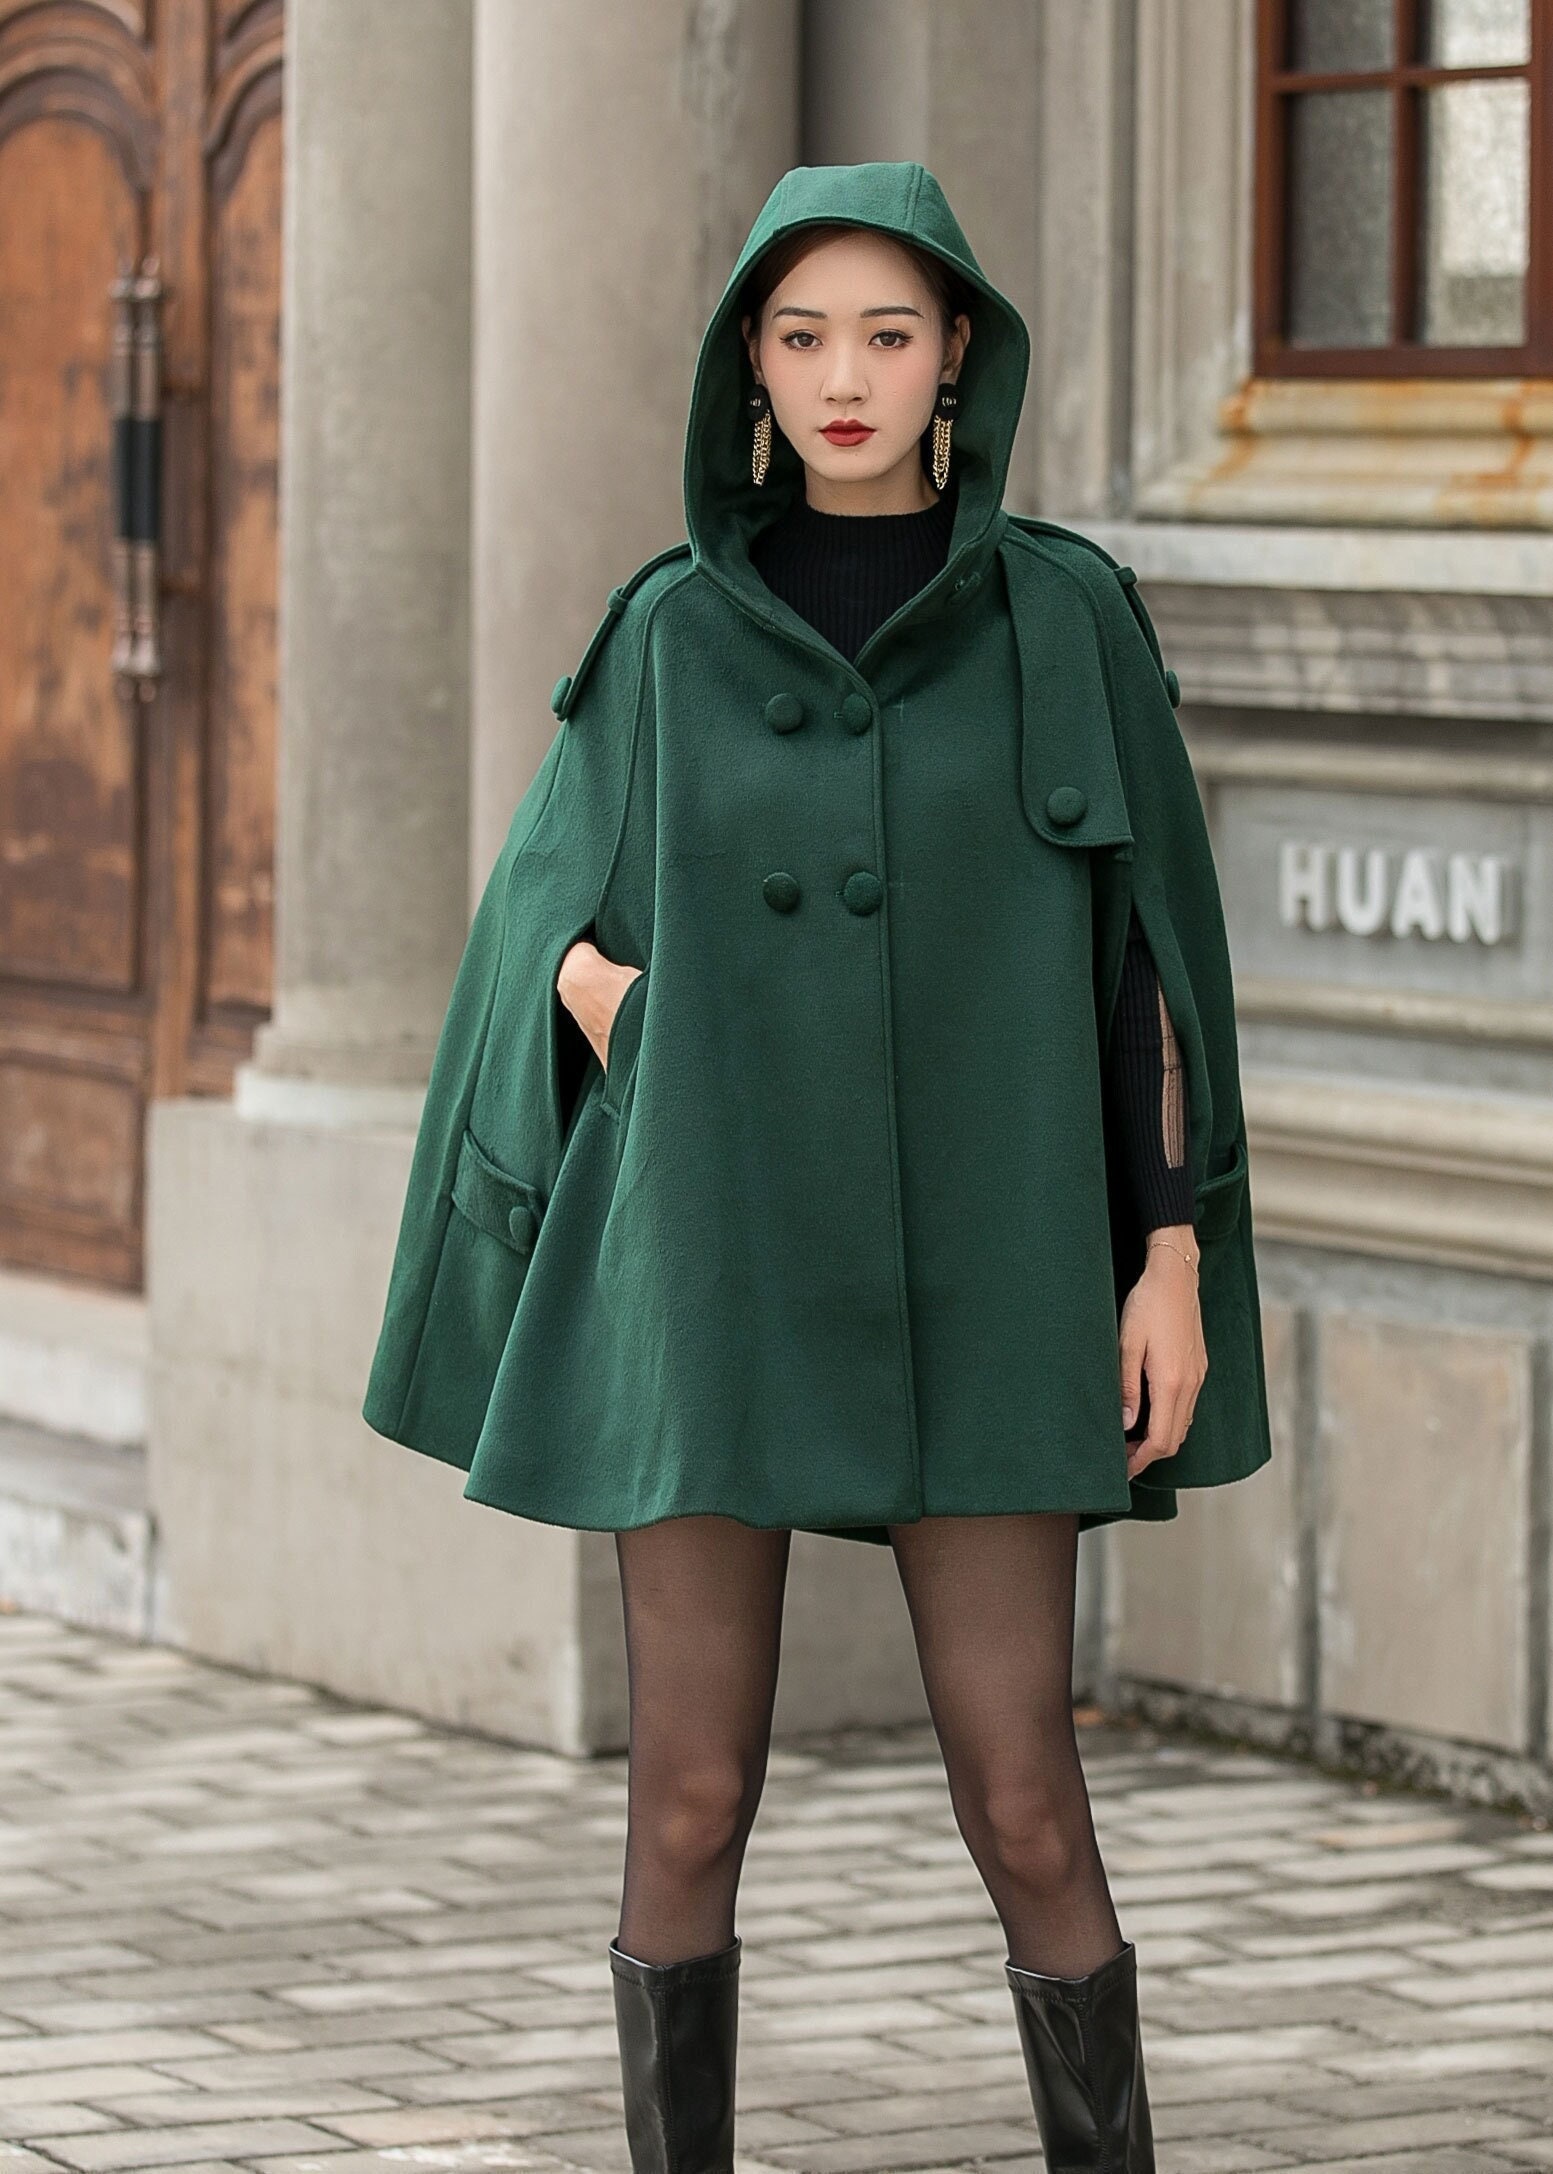 On sale, hooded cape coat